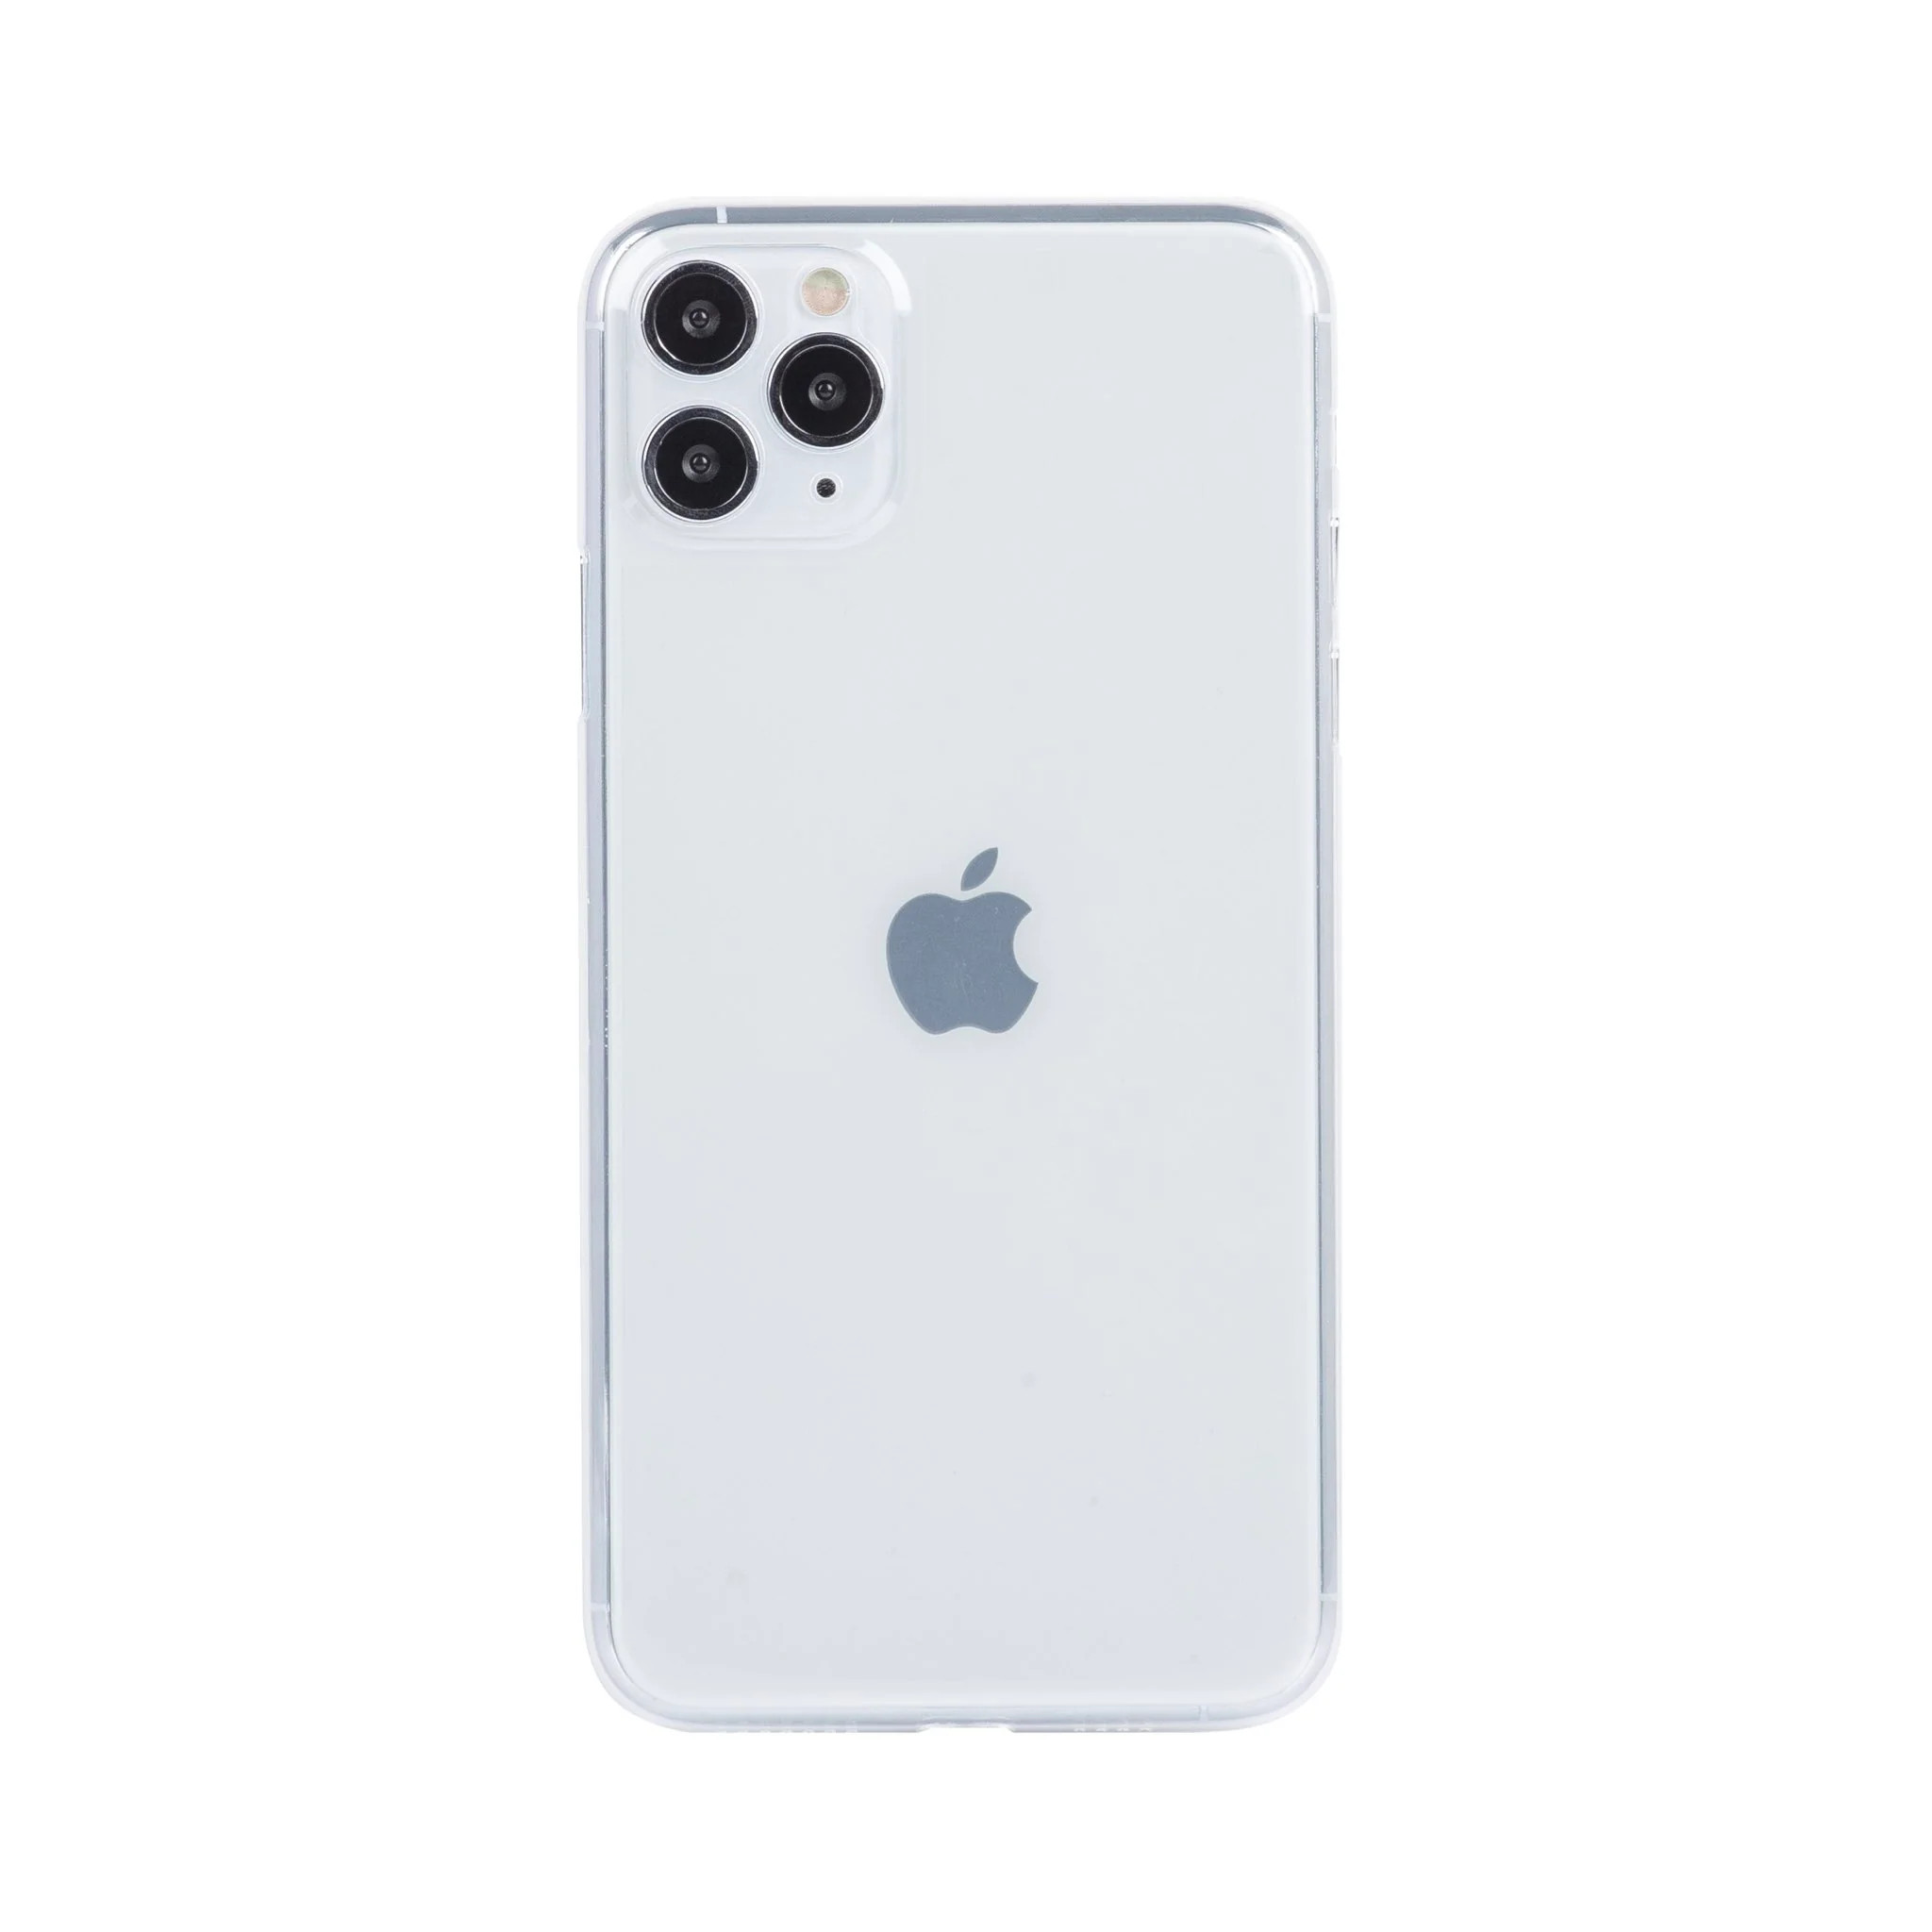 Slimcase Mobile Back Cover for iPhone 11 Pro Max